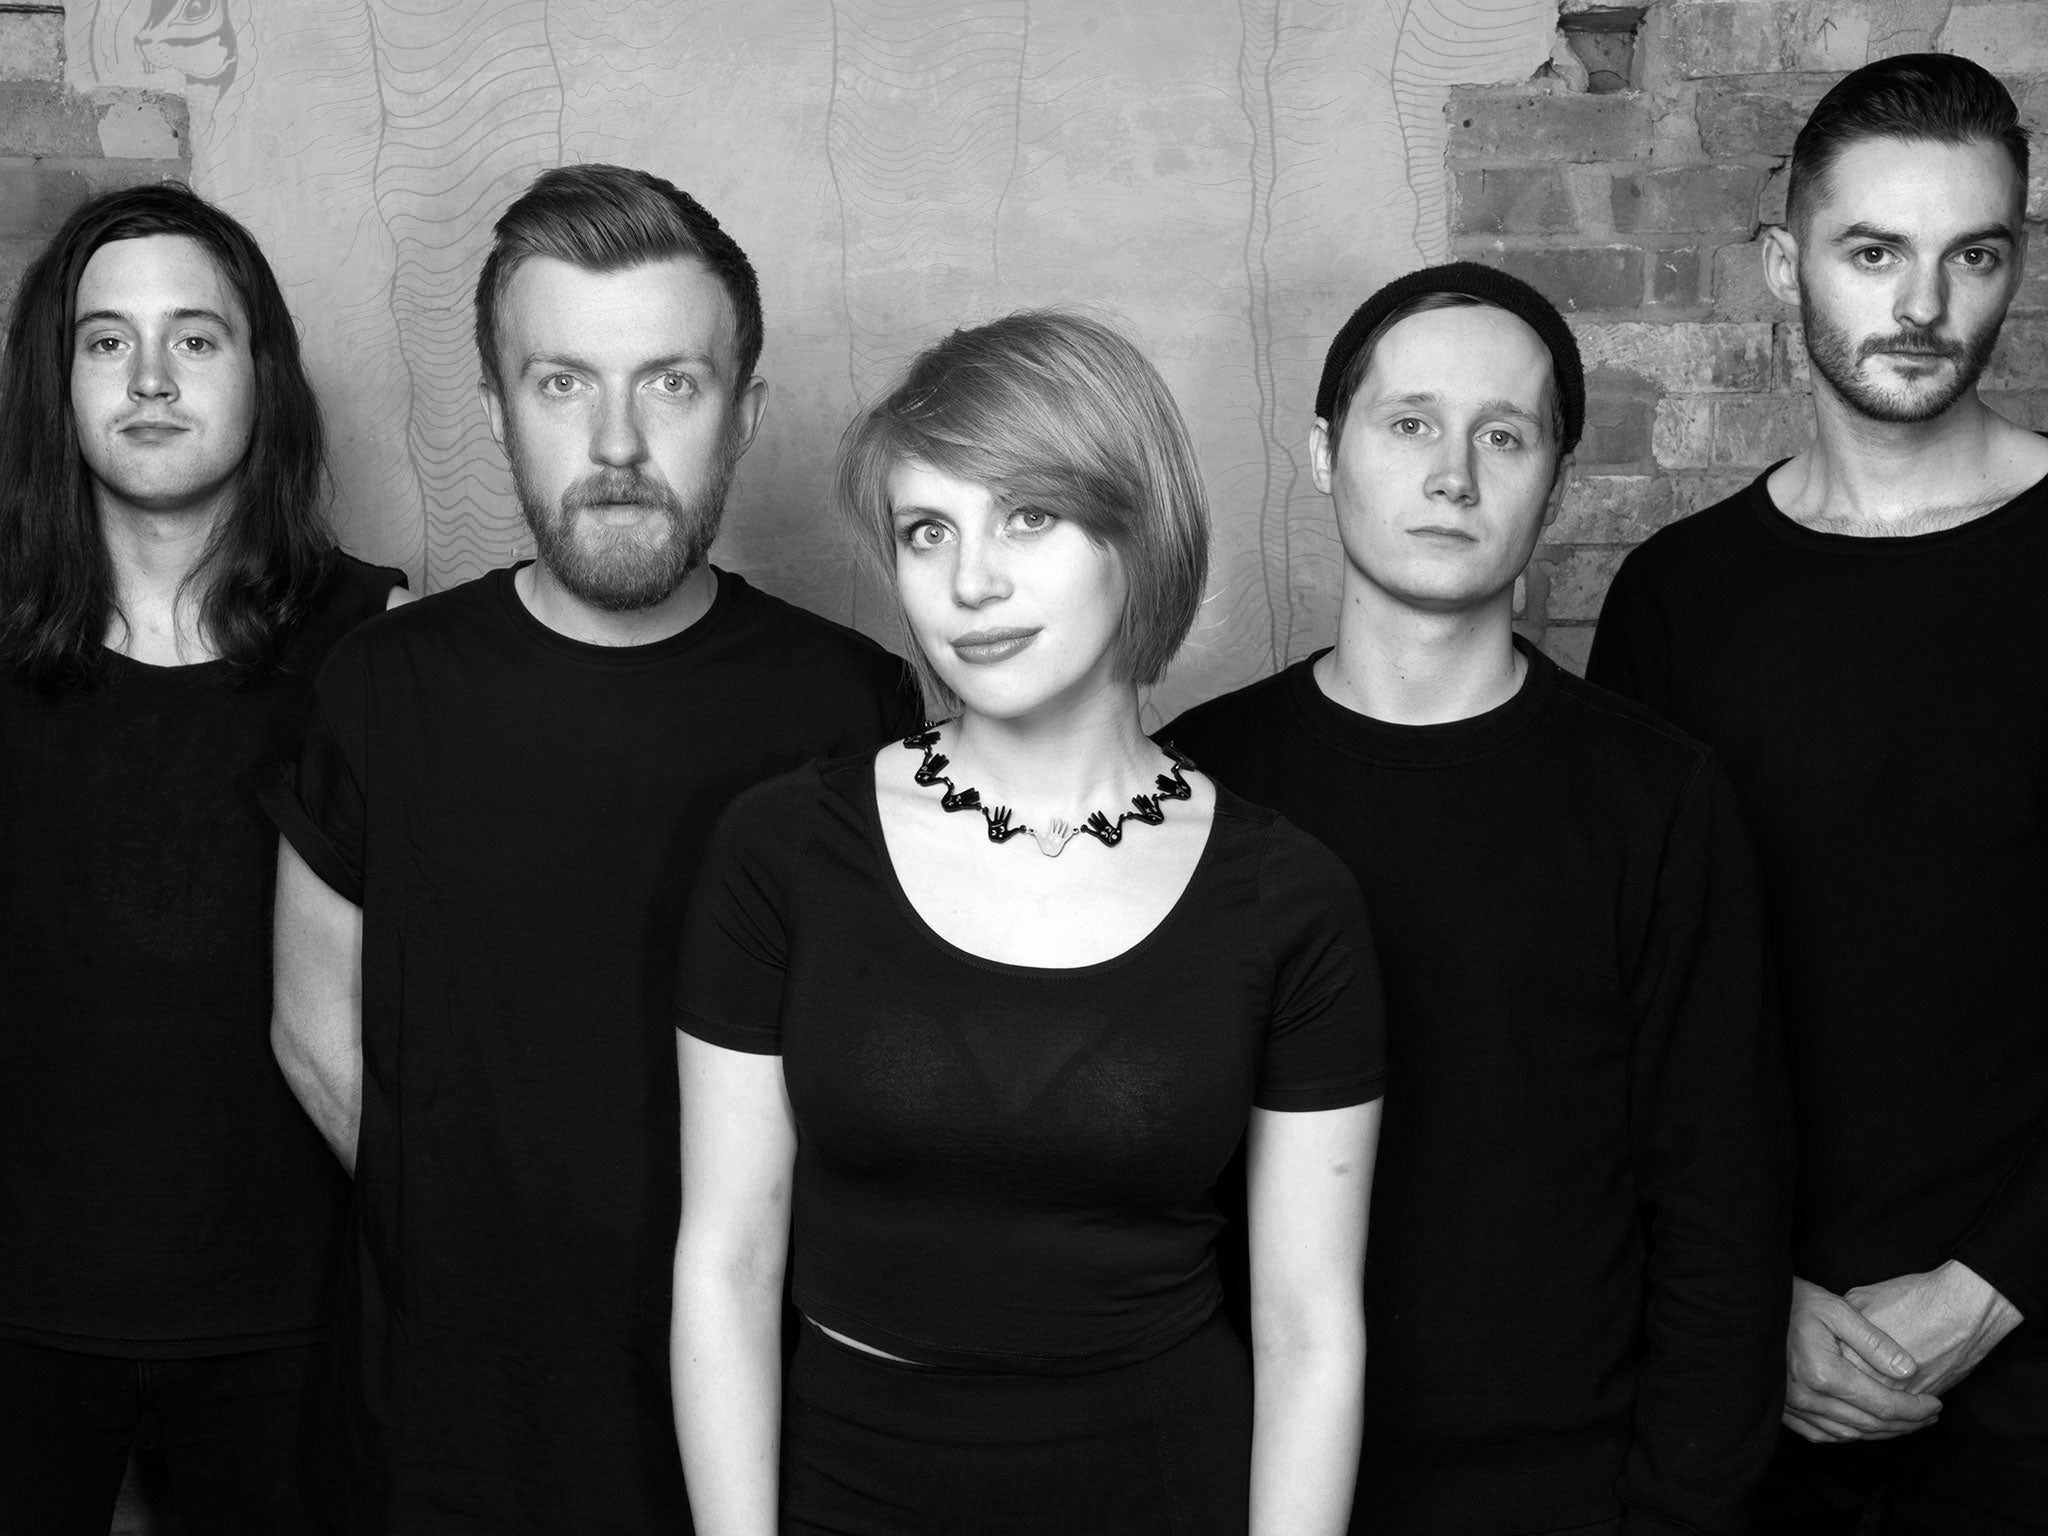 Rolo Tomassi, from left to right, Tom Pitts